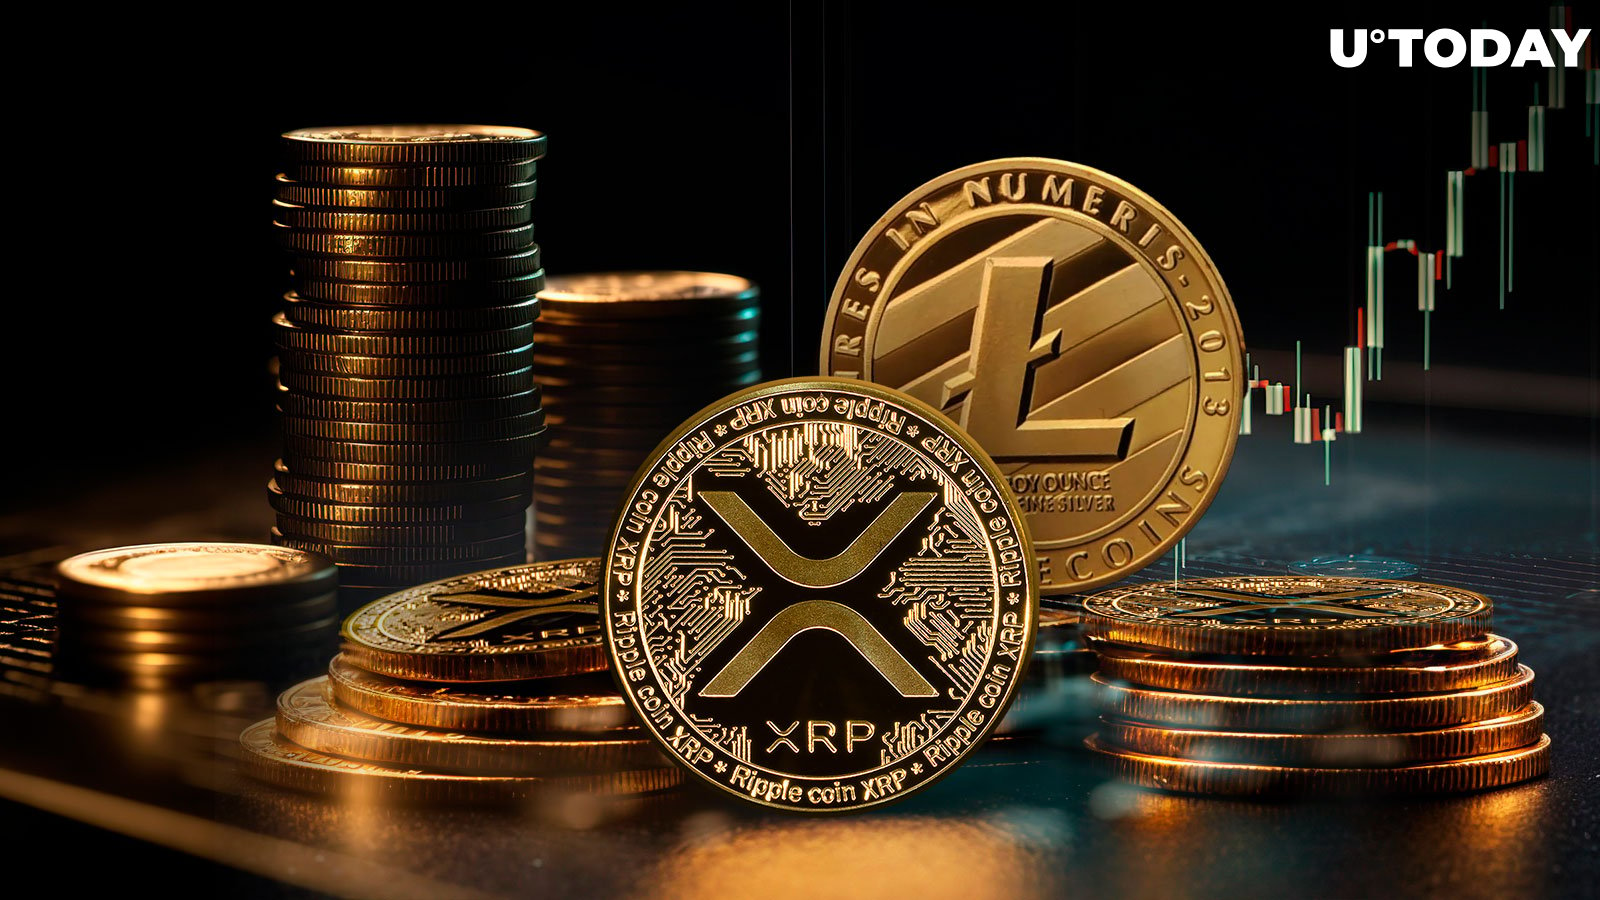 XRP and Litecoin Experiencing High Levels of FOMO